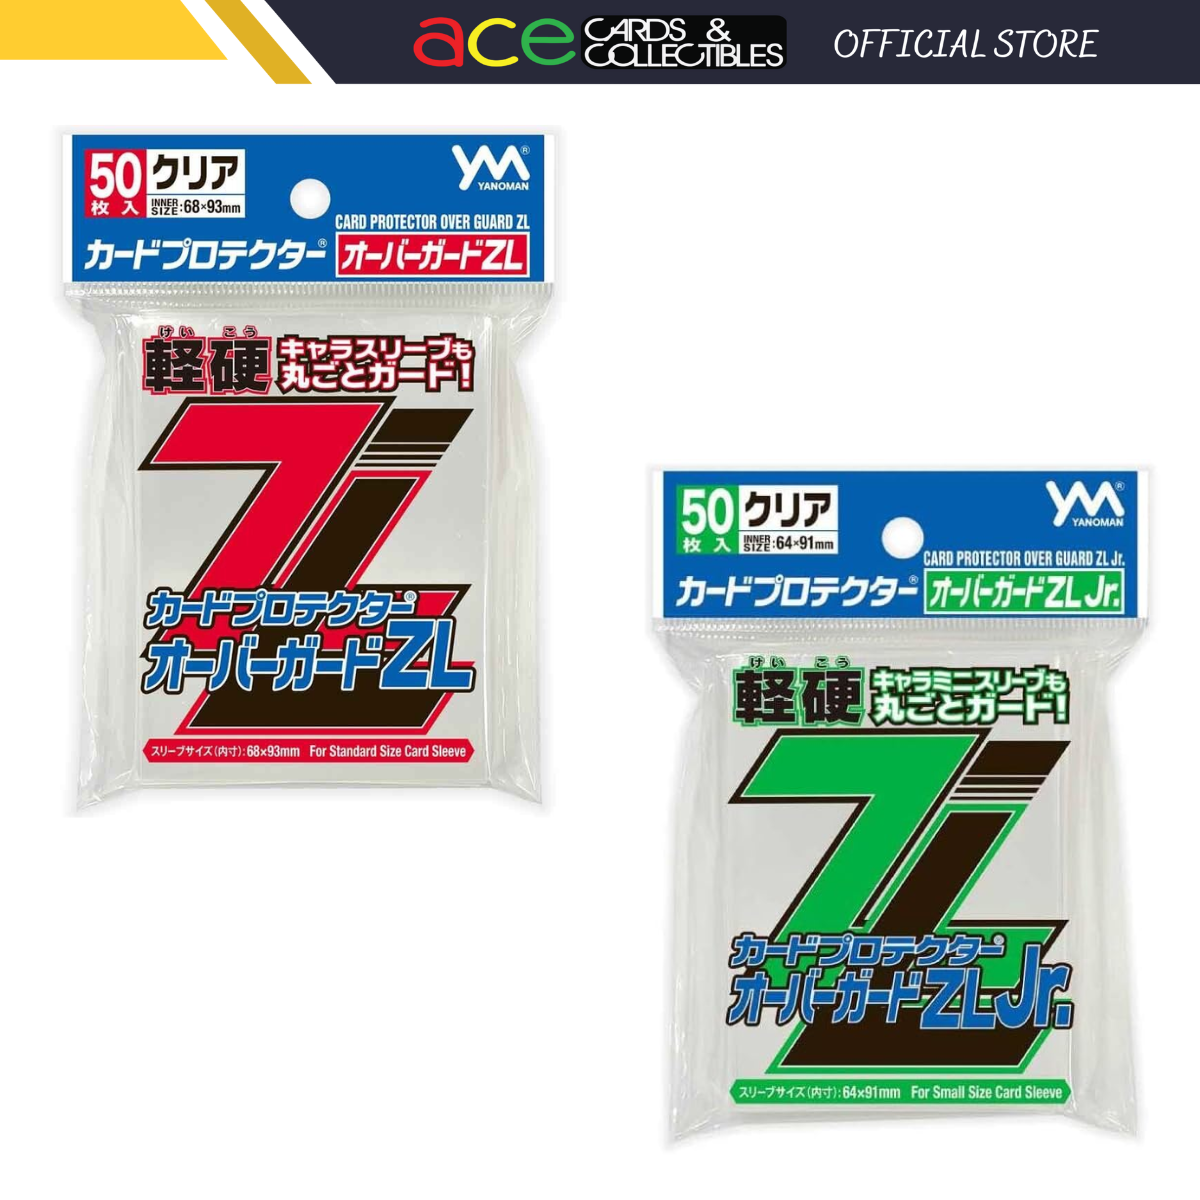 Yanoman Sleeve Card Protector Over Guard Z L Sleeve (New)-Japanese Size-Yanoman-Ace Cards & Collectibles